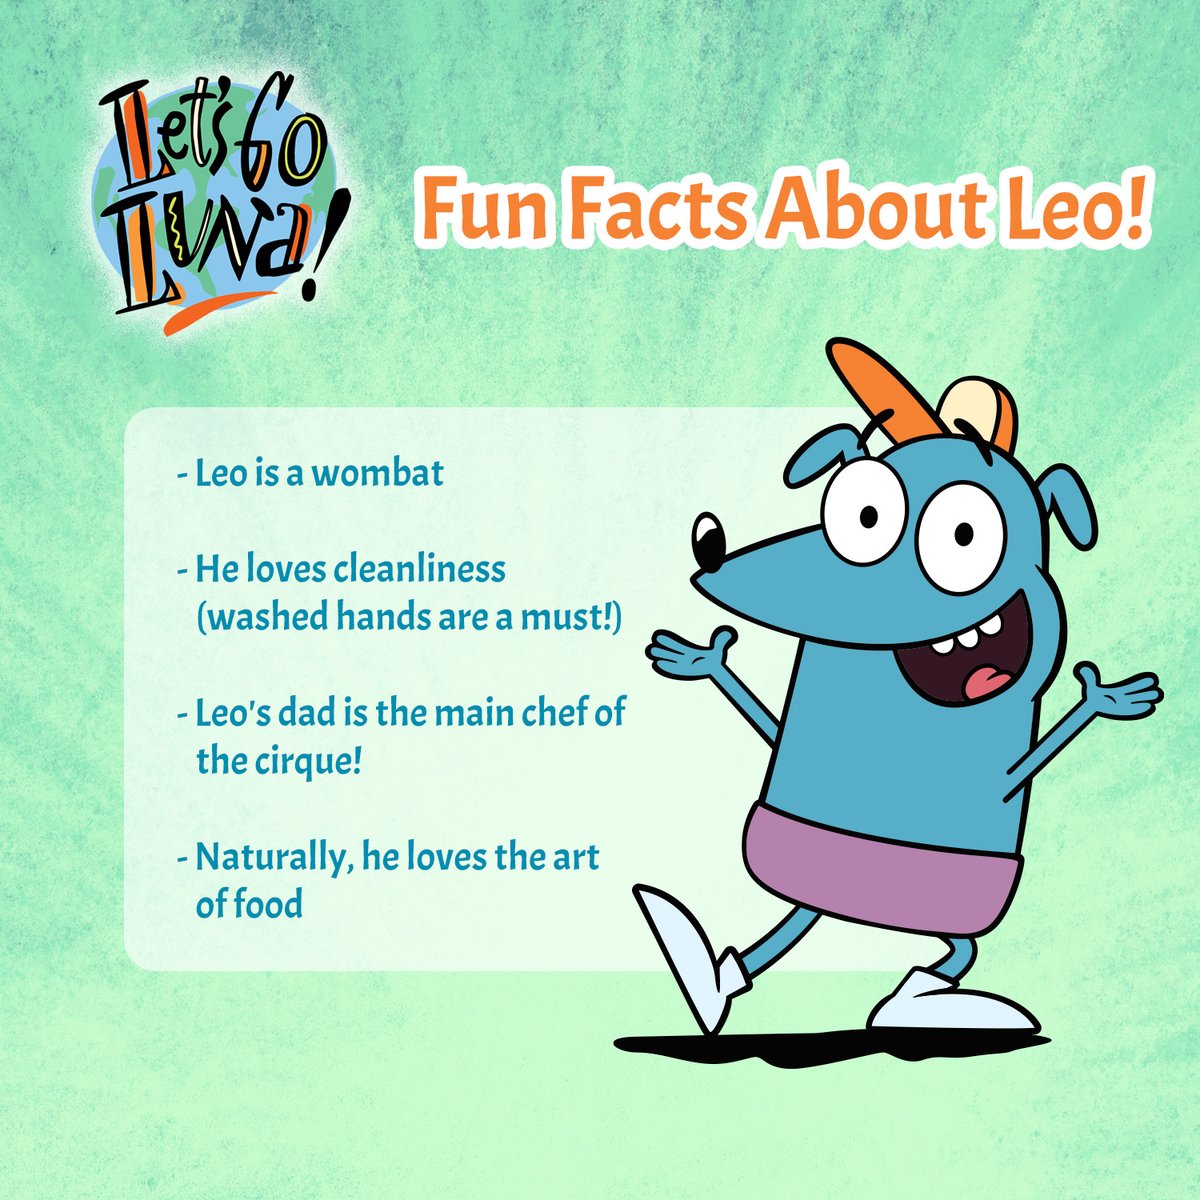 Letsgolunahq Fun Facts About Leo How Many Of These Facts Did You Know Letsgoluna